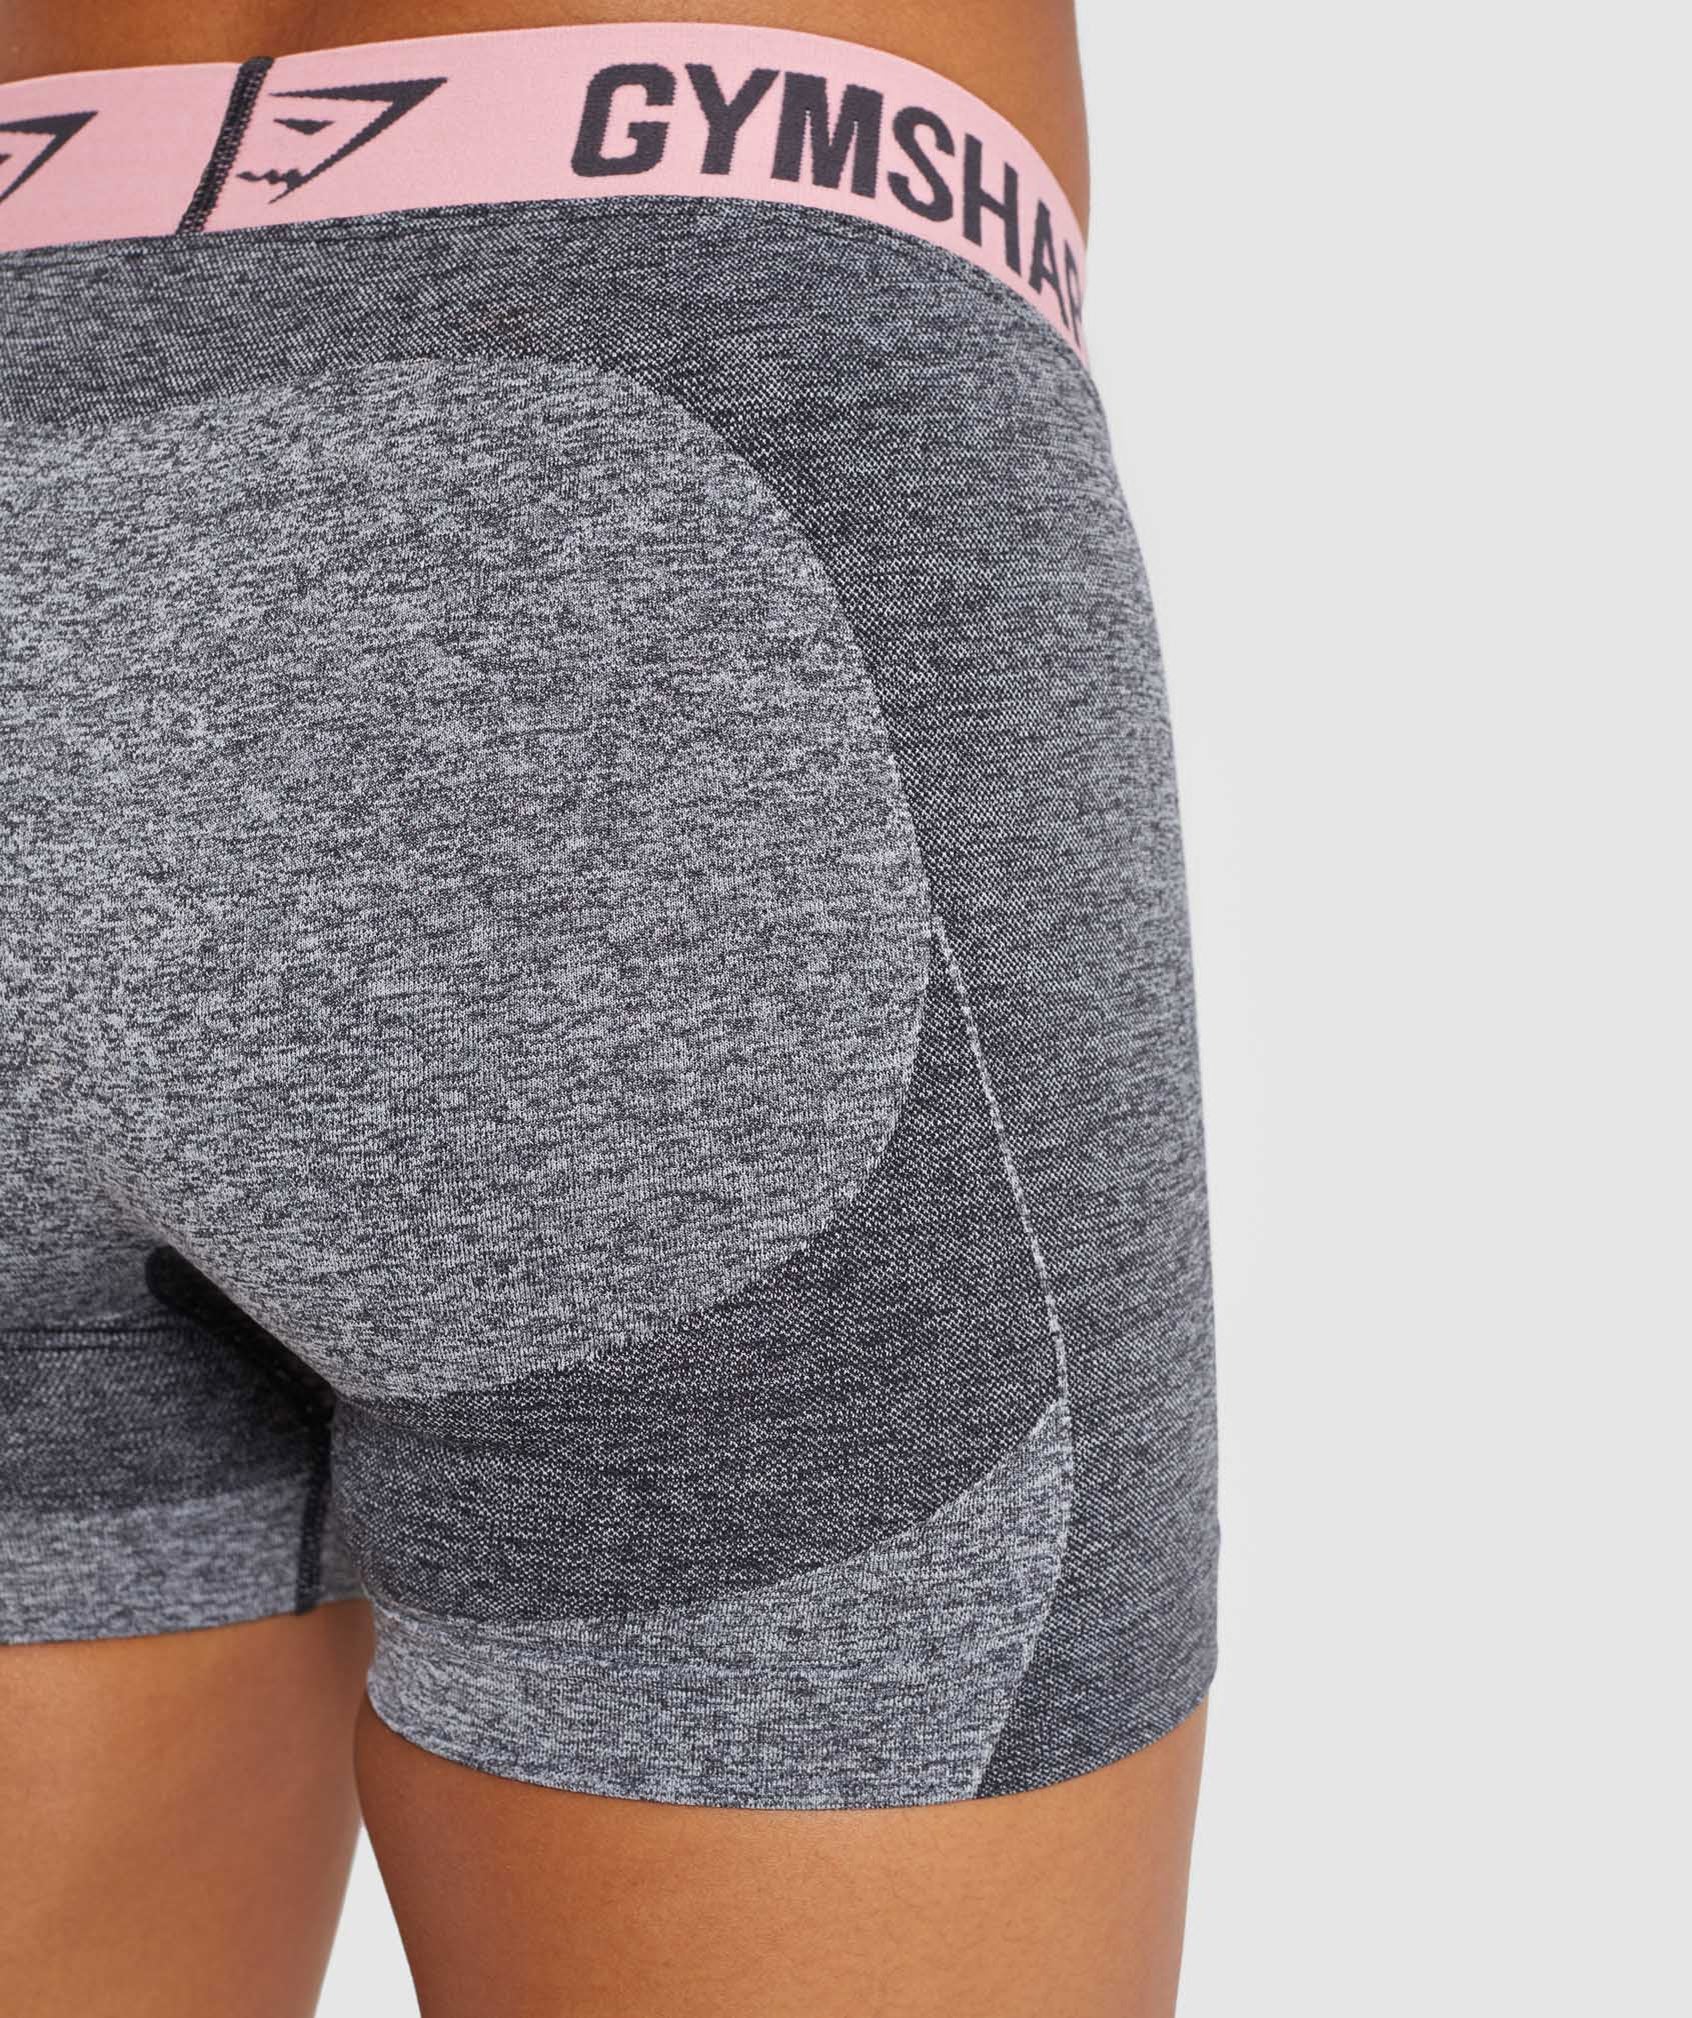 Flex Shorts in Charcoal Marl/Peach Pink - view 6